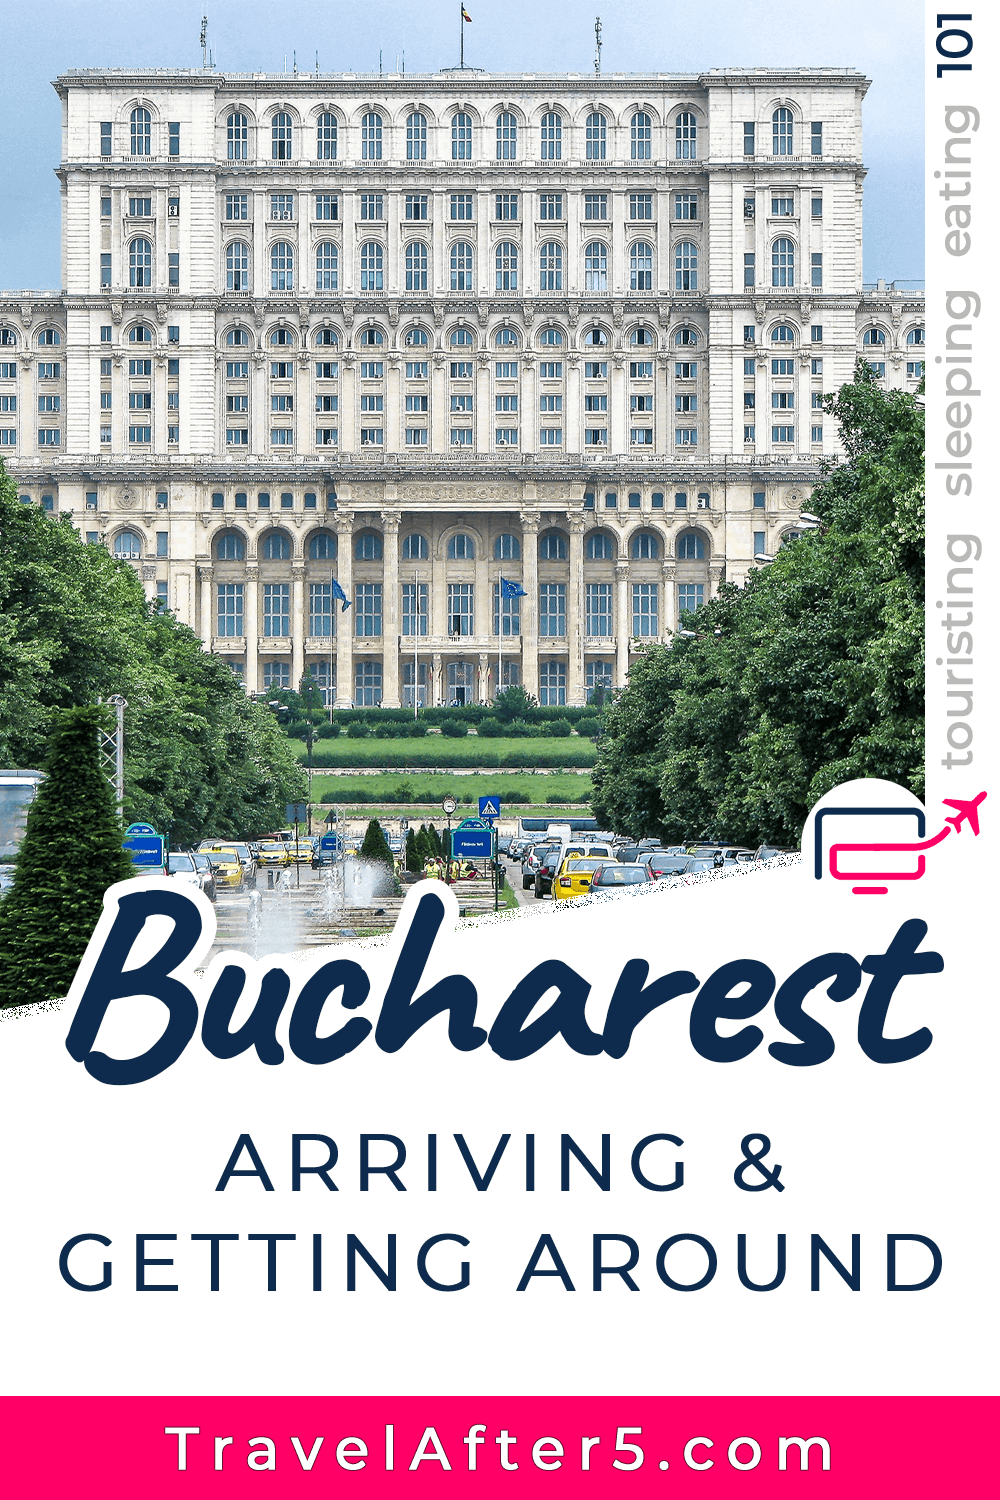 Pinterest Pin to Bucharest 101, Arriving & Getting Around, by Travel After 5